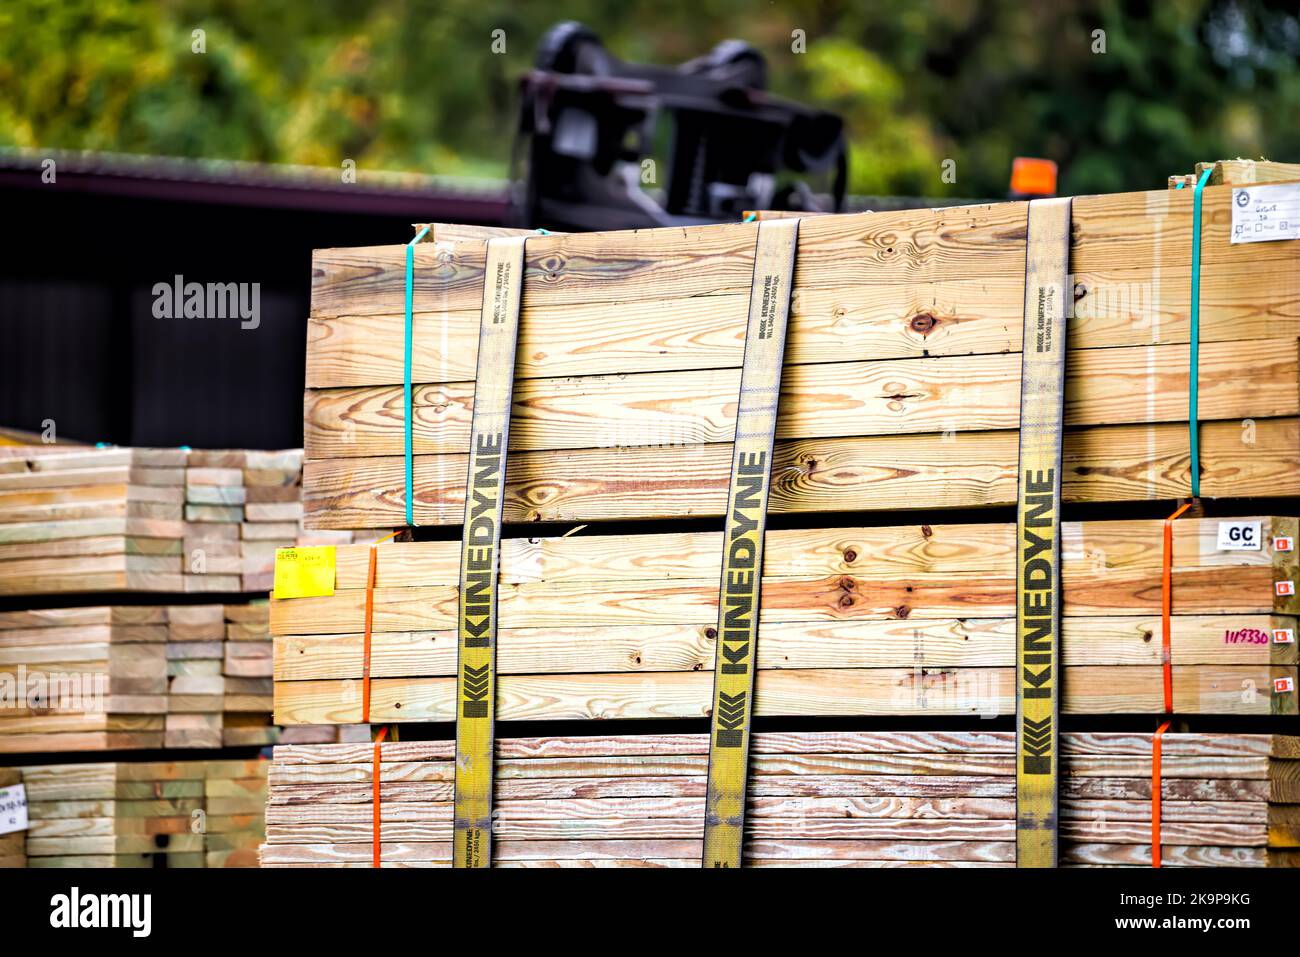 Culpeper, USA - October 7, 2021: Lumber boards wooden plank studs on truck trailer transport for commercial industrial material supply in Virginia Stock Photo